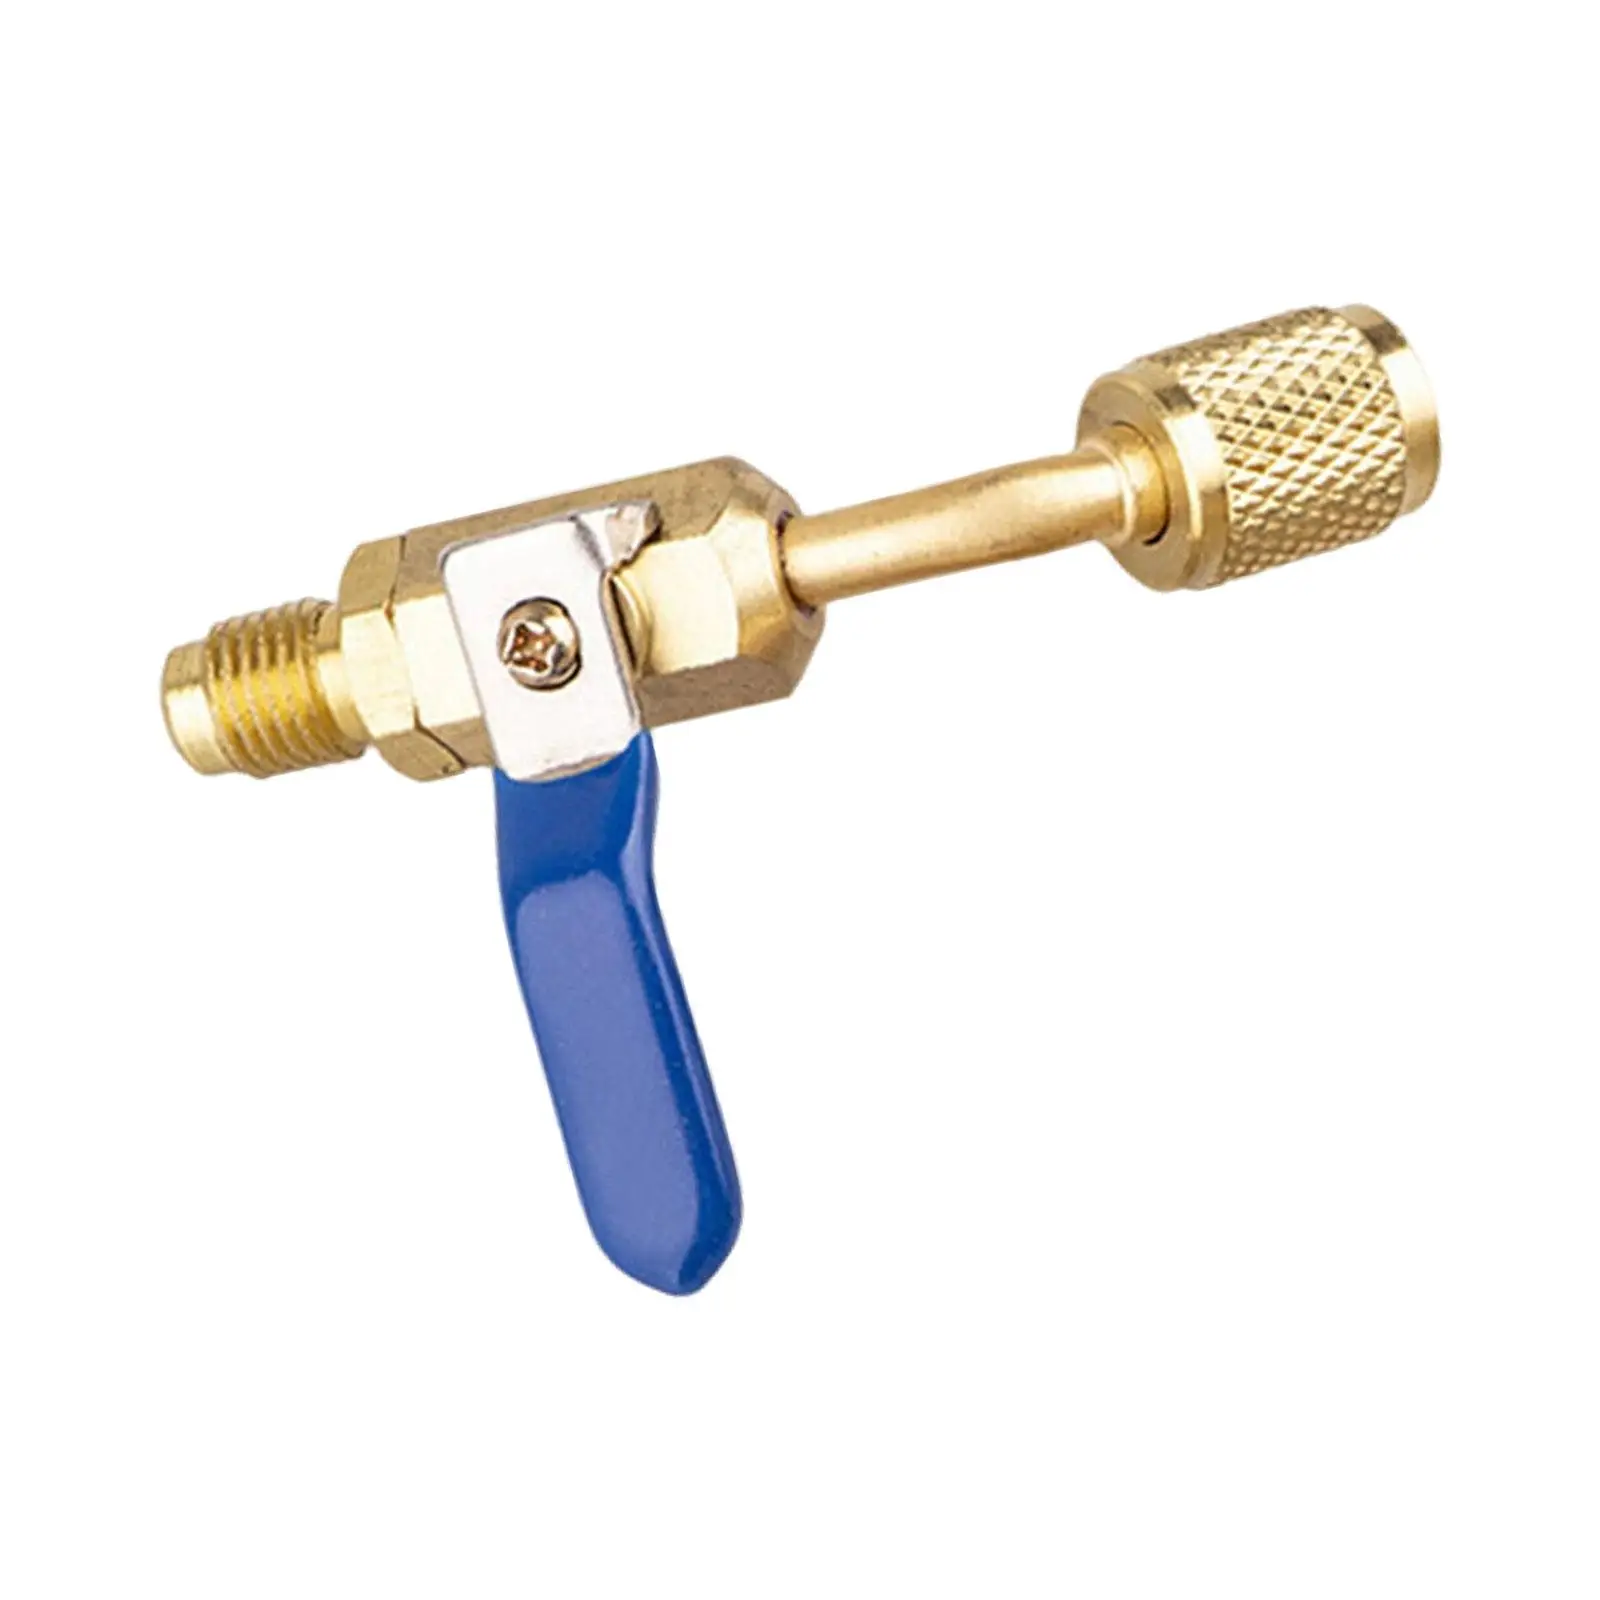 Air Conditioning Refrigerant Safety Valve Copper Compact Connector Shut Off Valve Quick Coupler Air Conditioner Ball Valve